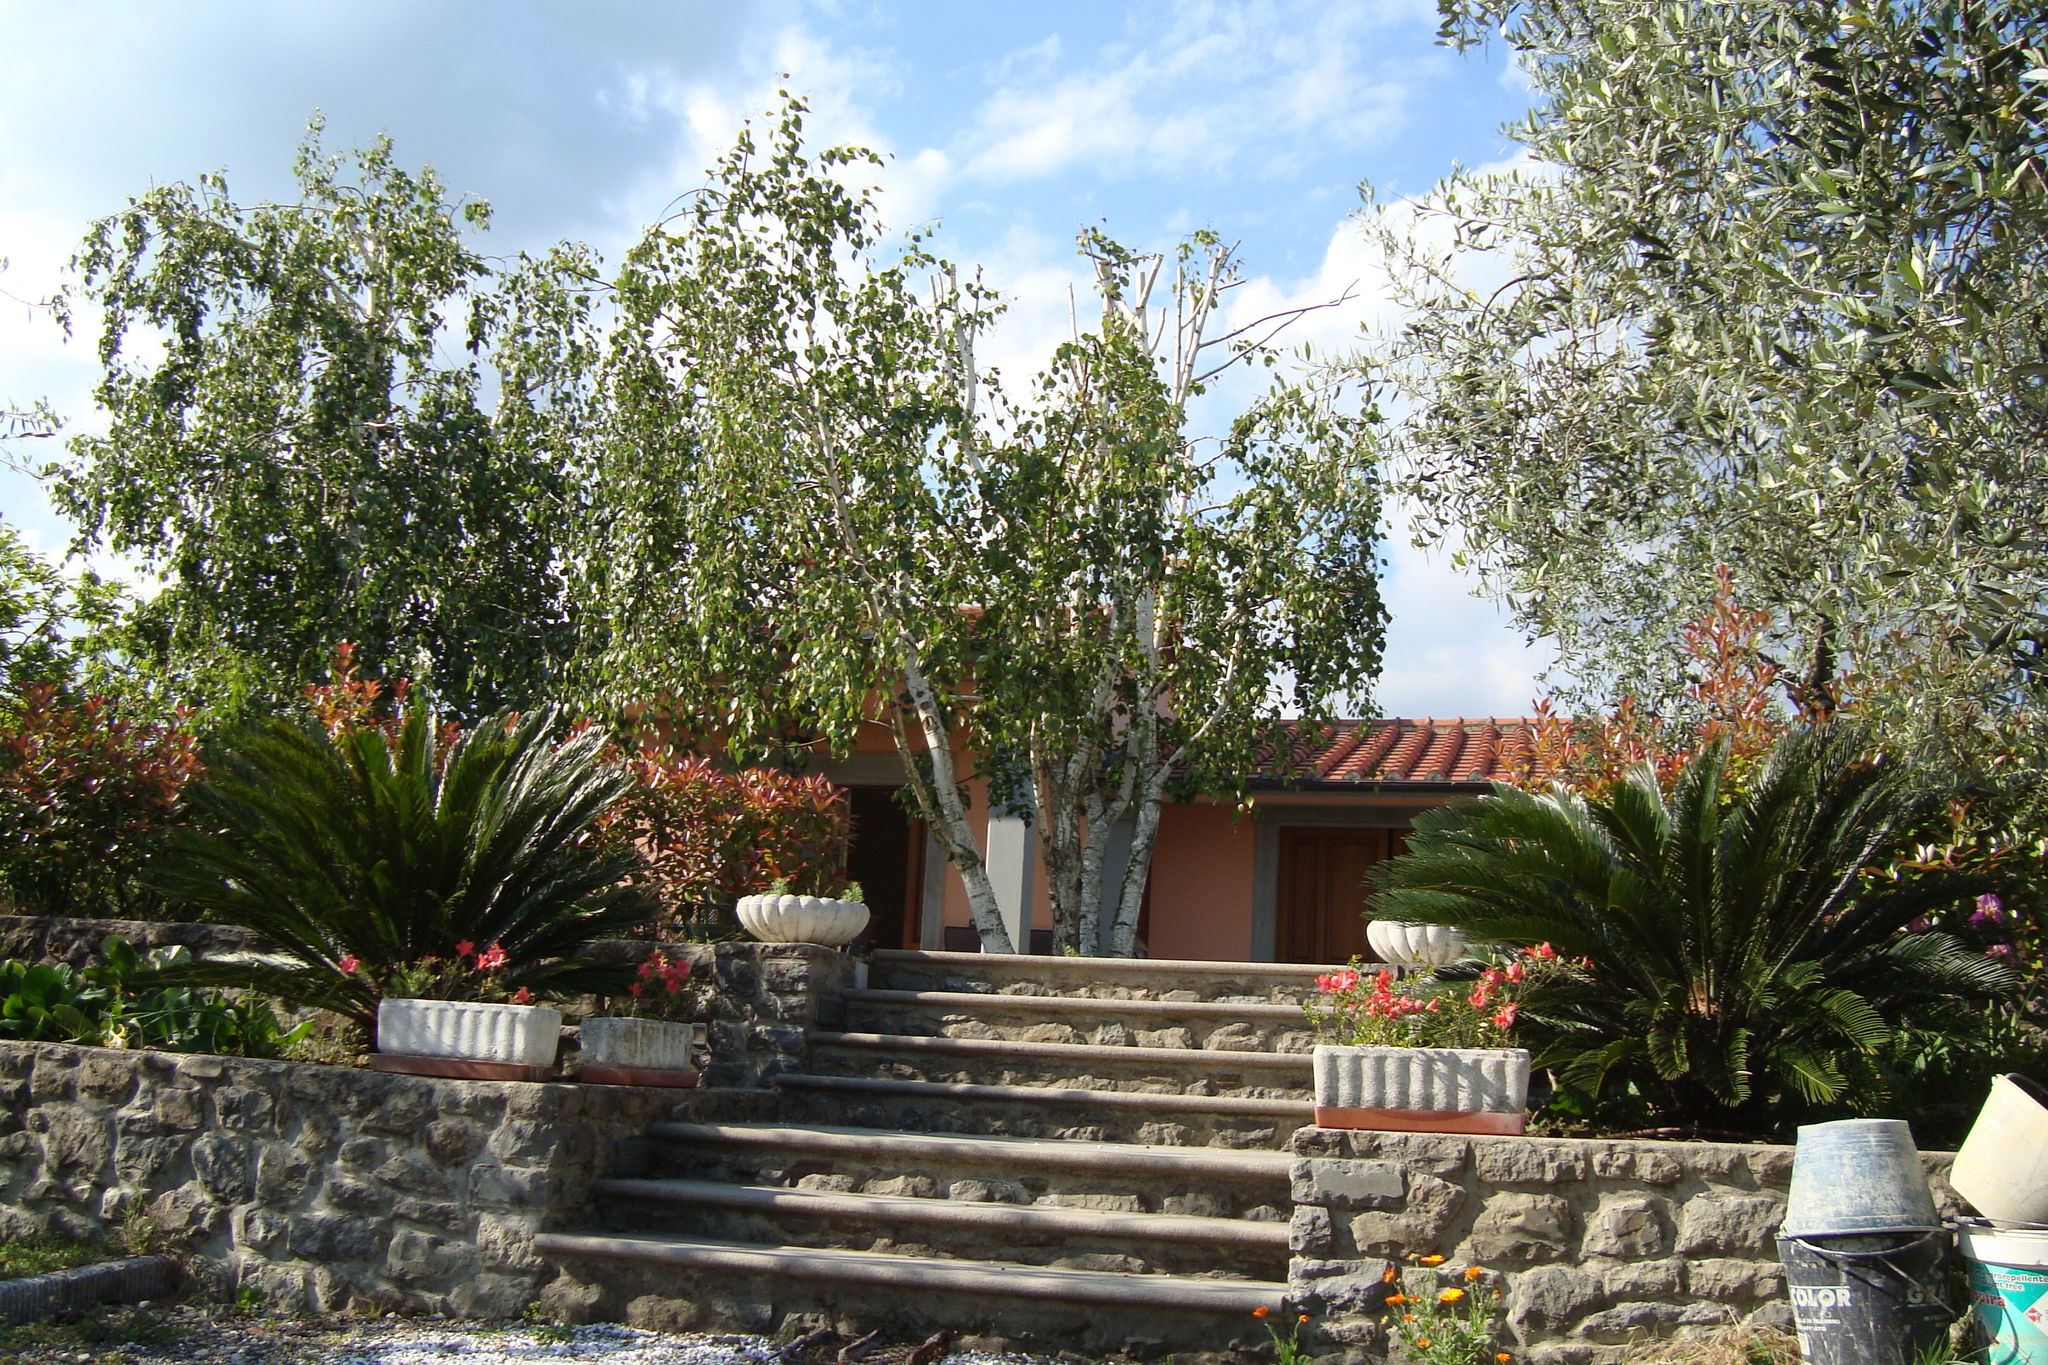 House in the Pistoia countryside with pool and garden, ideal for outdoor lunches